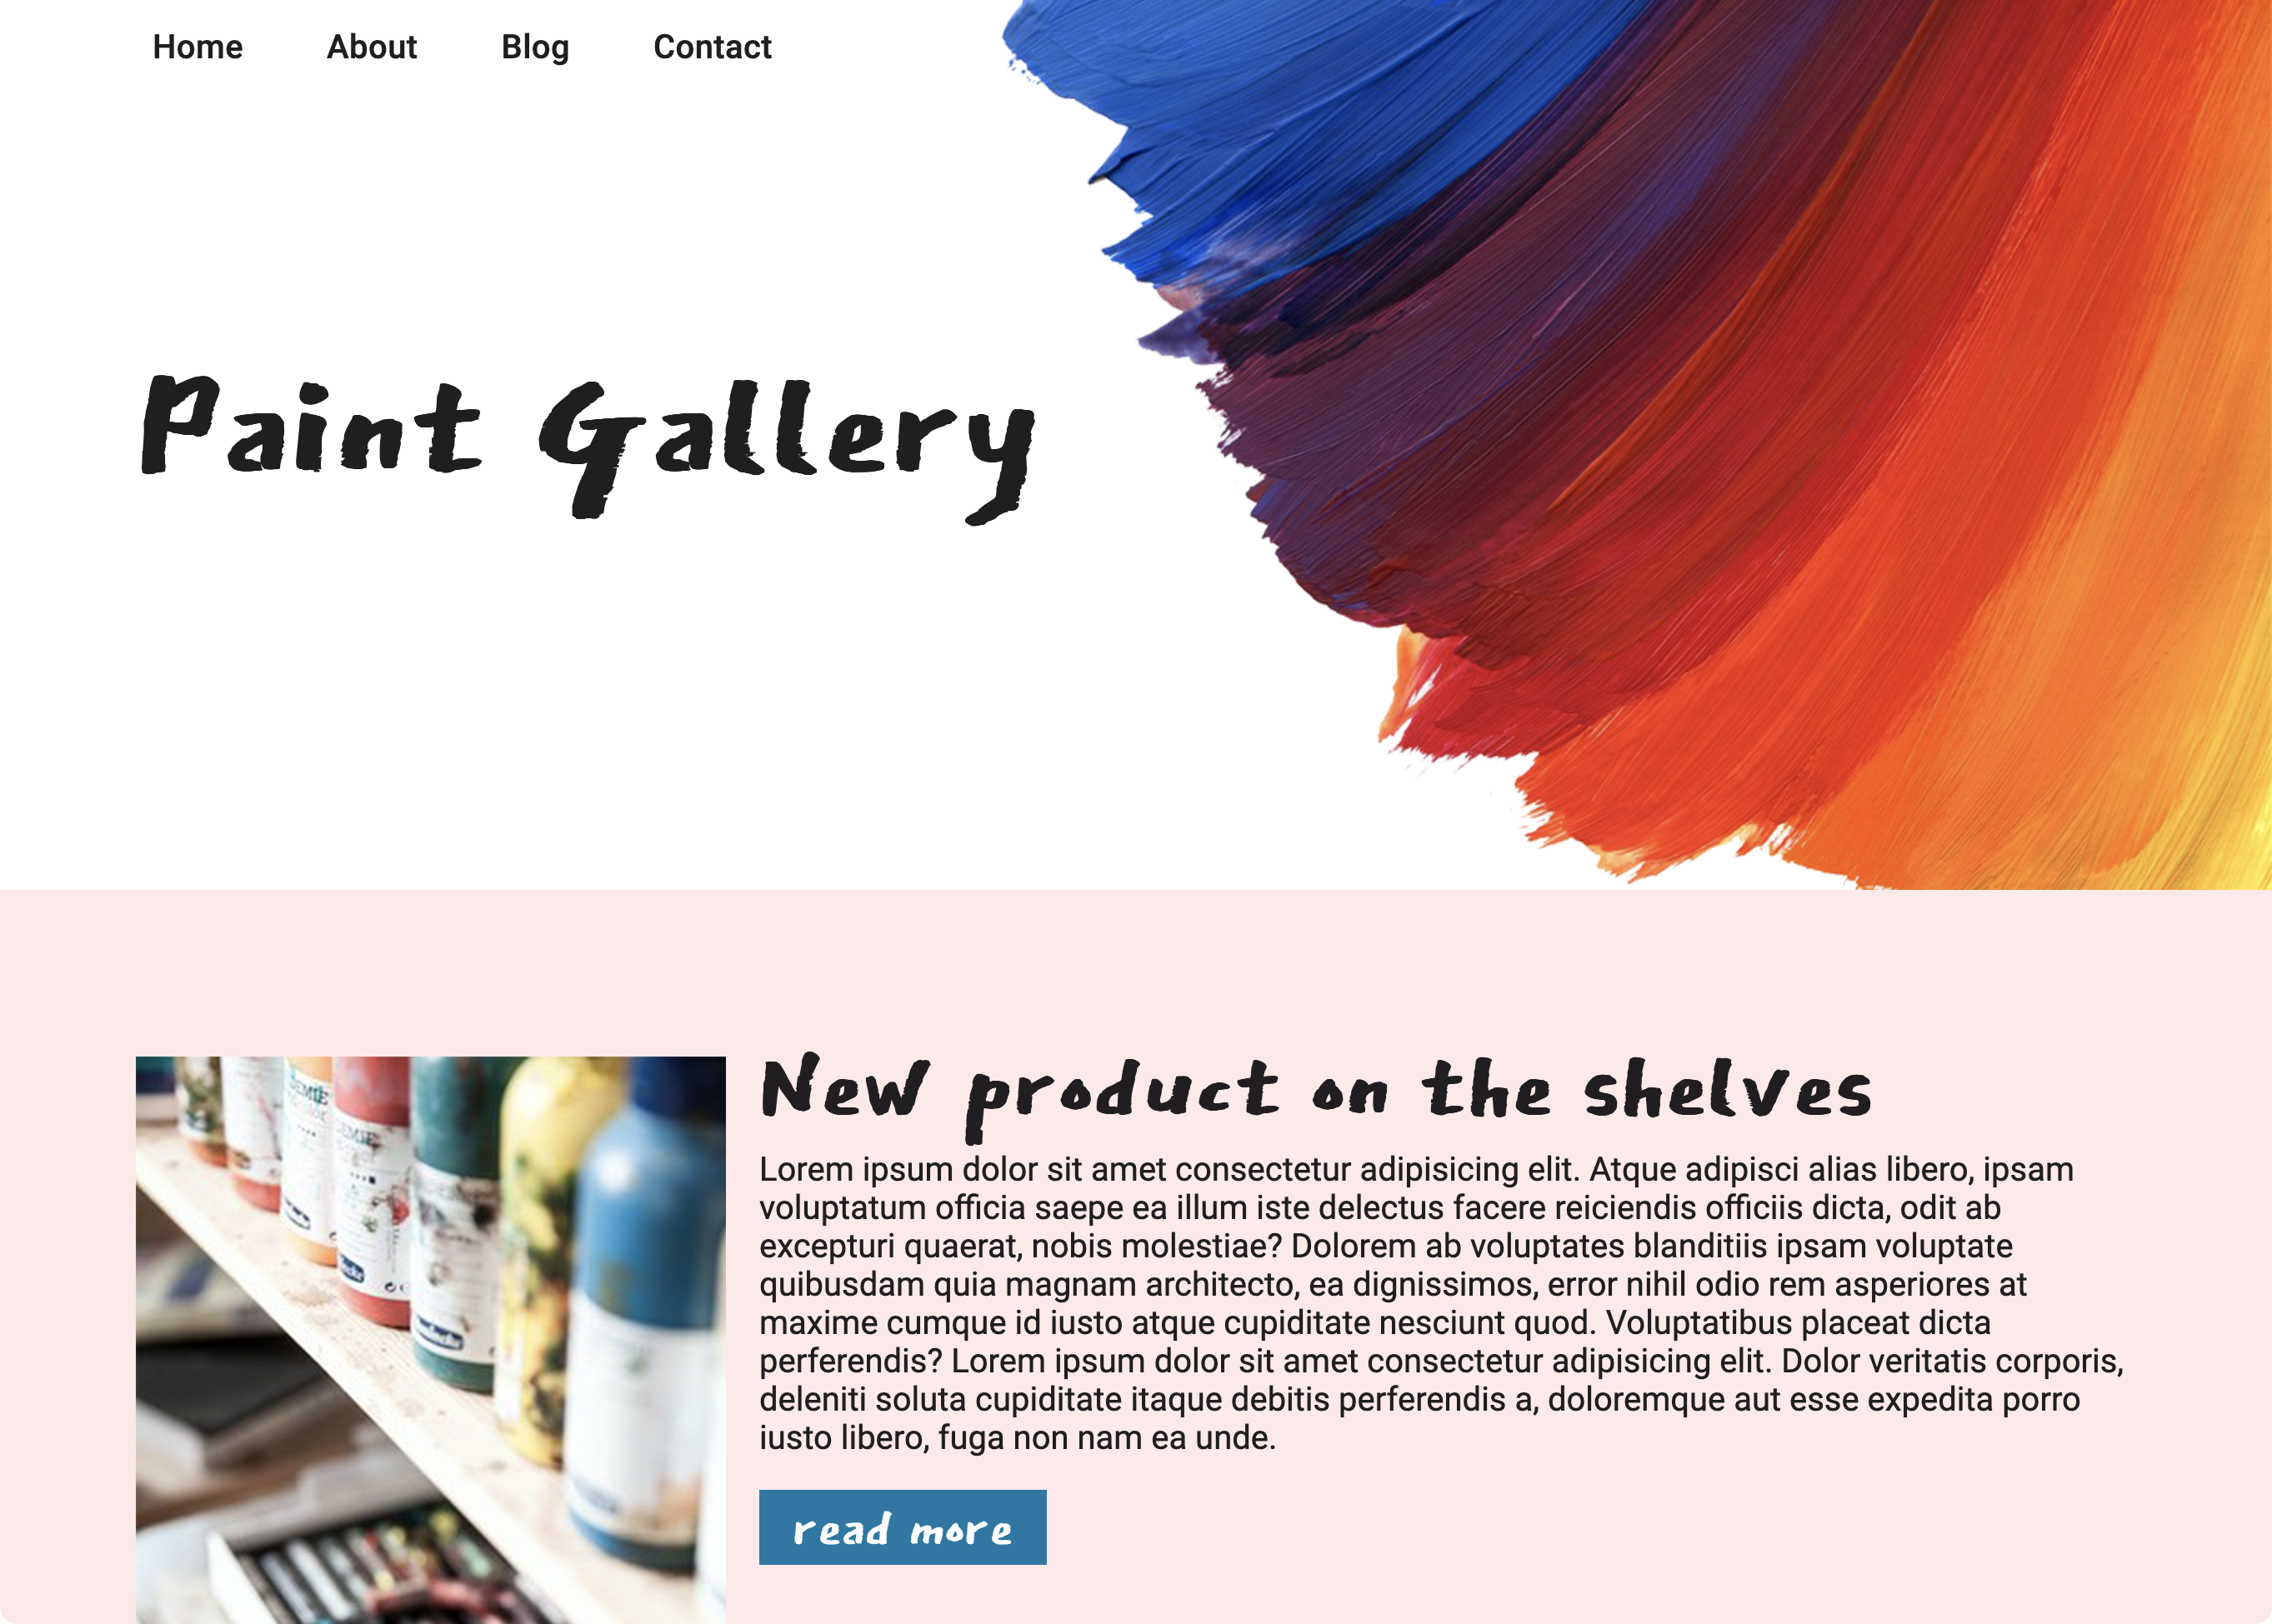 Image of Paint Gallery webpage